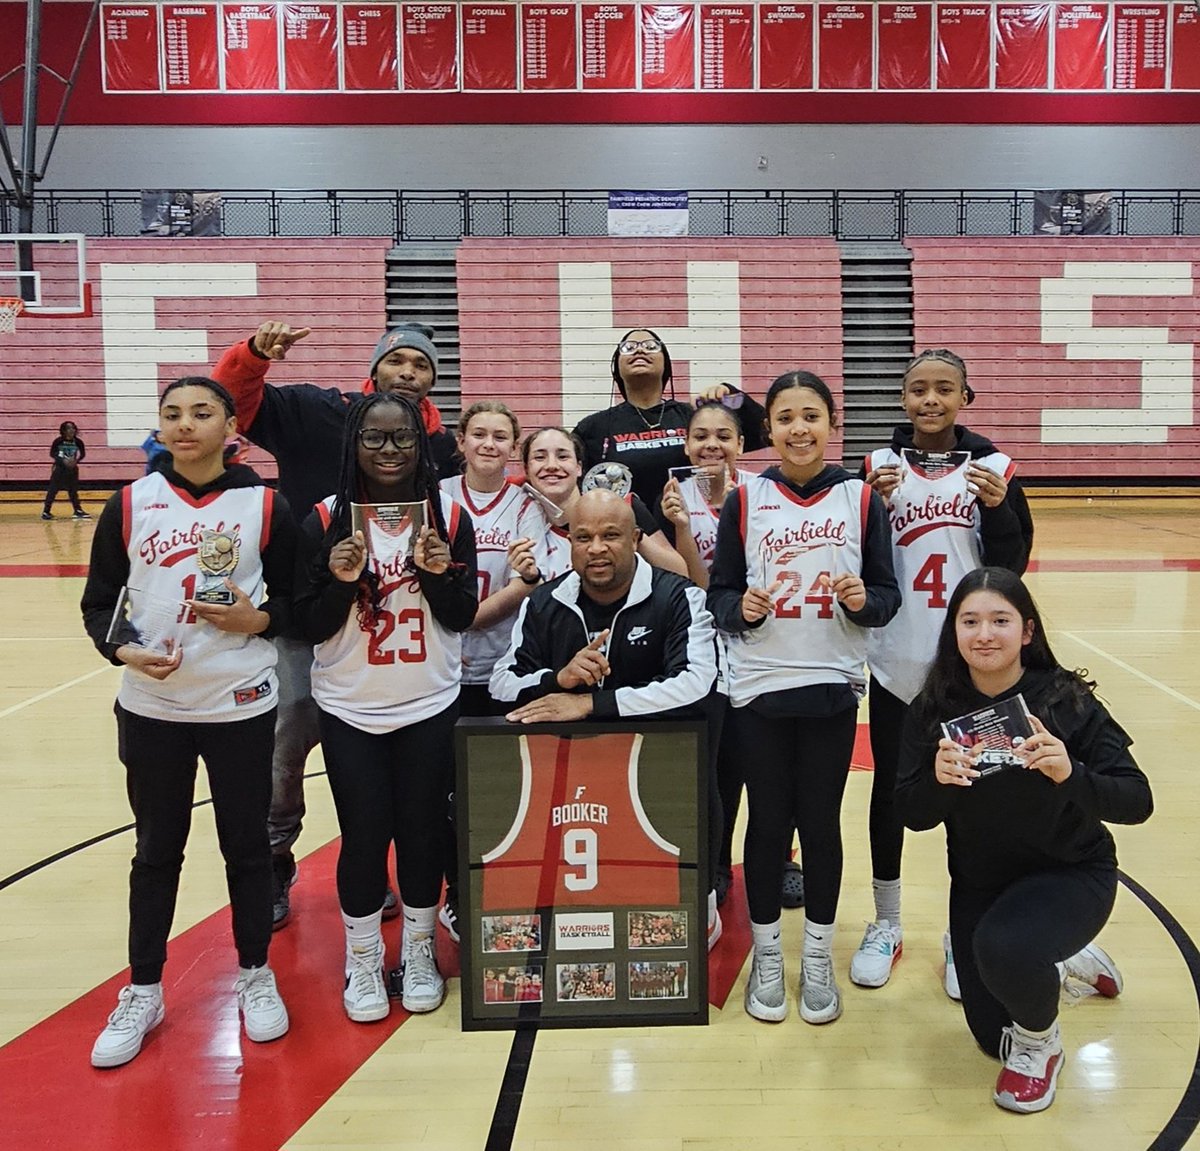 The Fairfield Warriors youth program had their awards night tonight and part of the celebration was to recognize Coach @KenBooker8 on his final season, an undefeated 28-0, with the program! They retired his number (number of seasons with the program). Thank you, Ken!!!